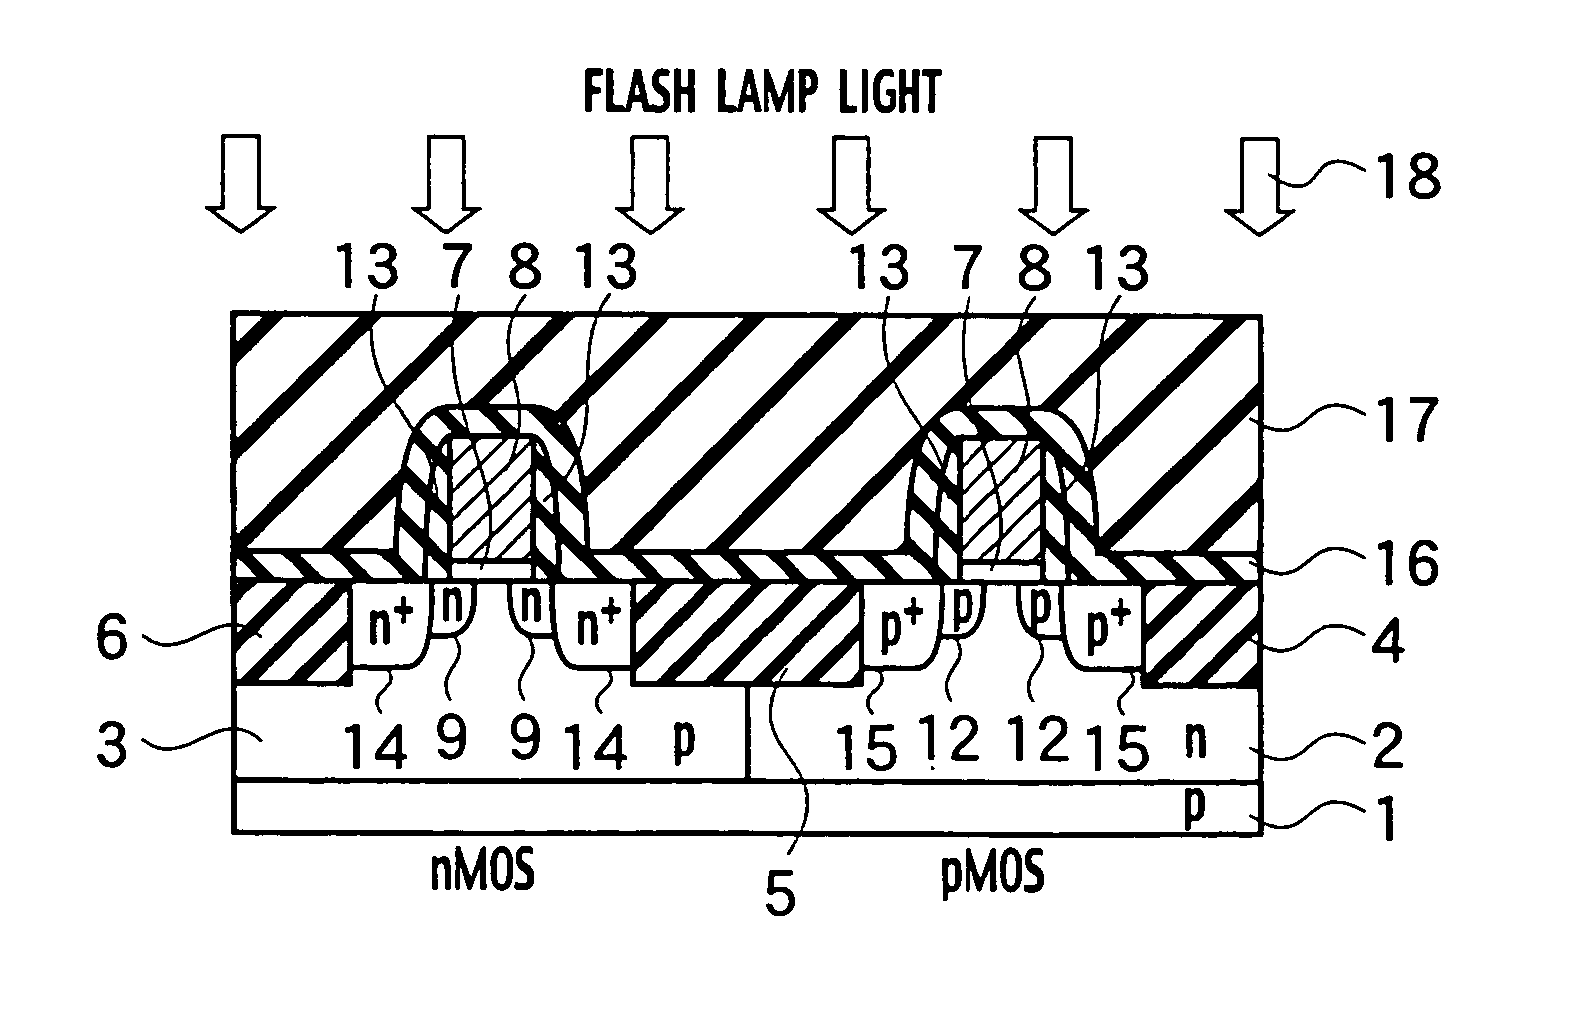 Semiconductor device including a semiconductor substrate formed with a shallow impurity region, and a fabrication method for the same